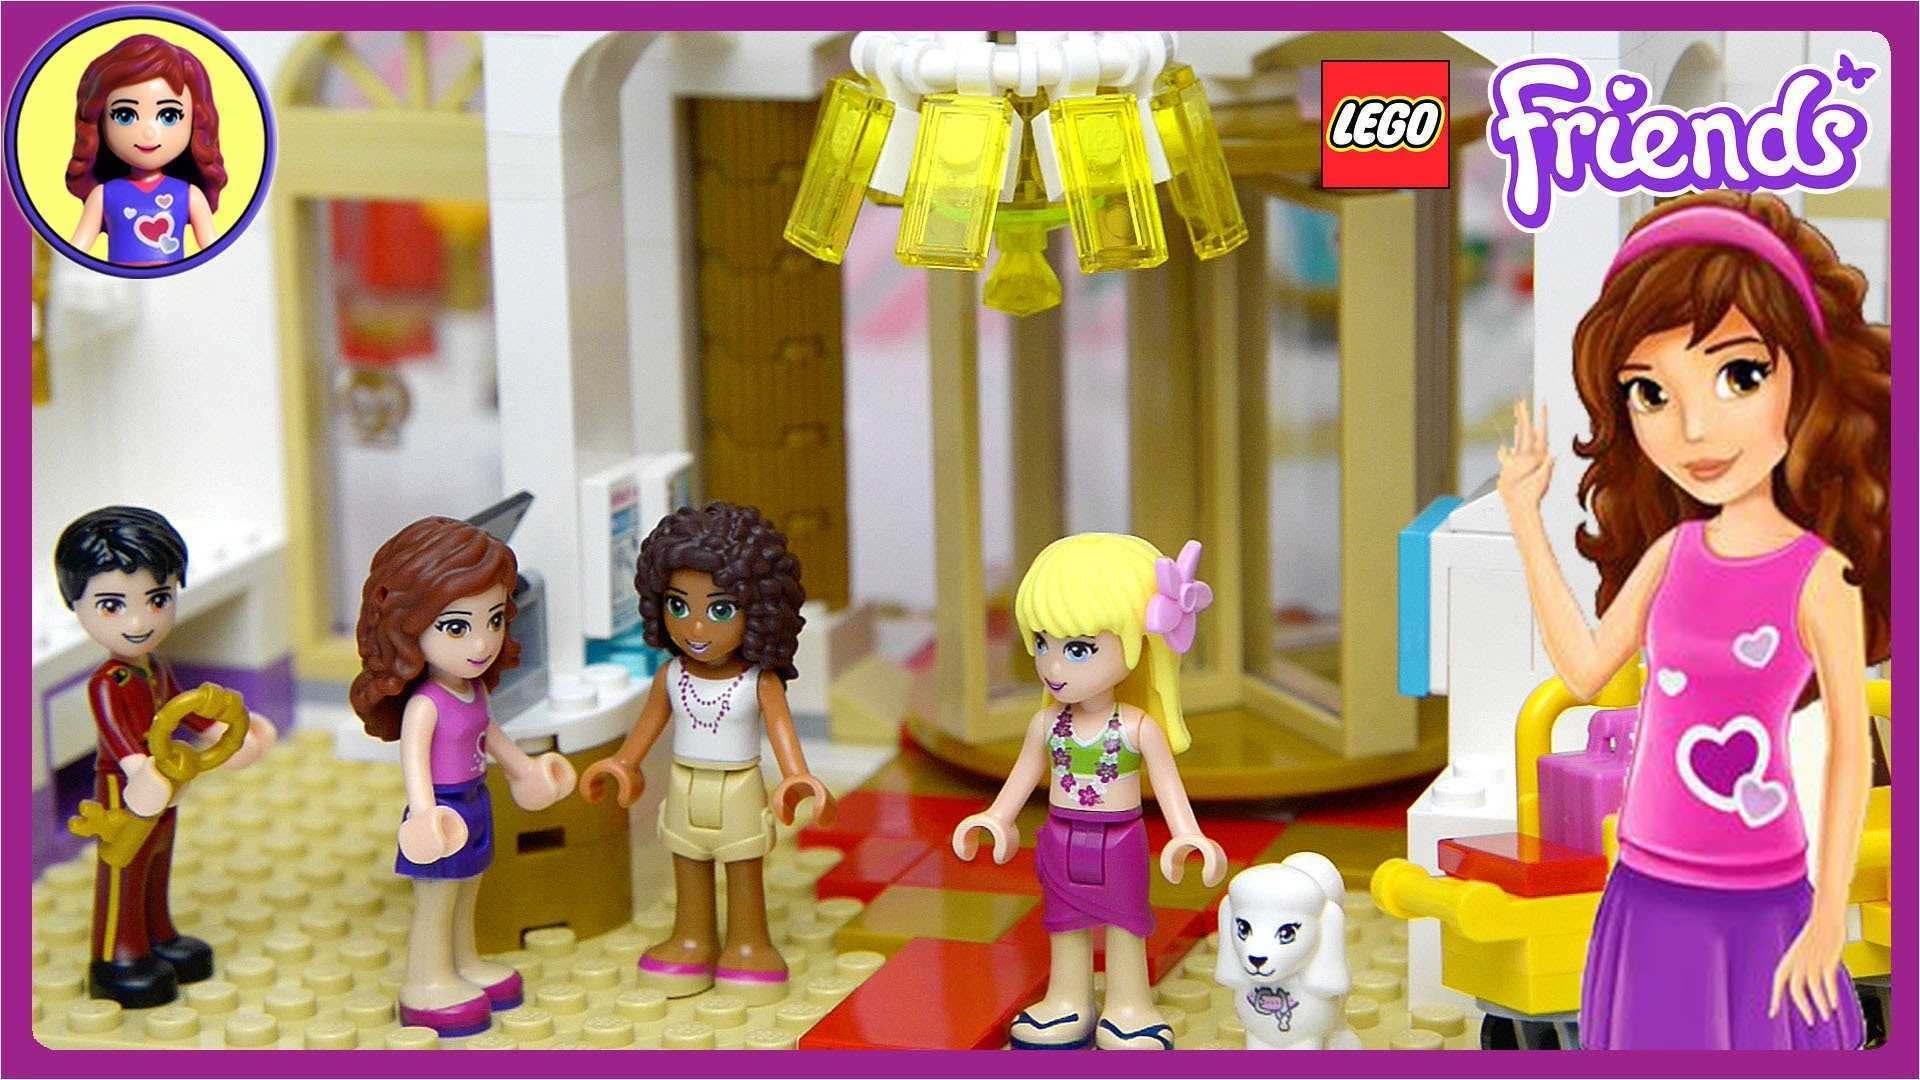 1920x1080 Dessin Lego Friends Lovely Lego Friends Heartlake Grand Hotel Set Part 1  Unboxing Building Of 55